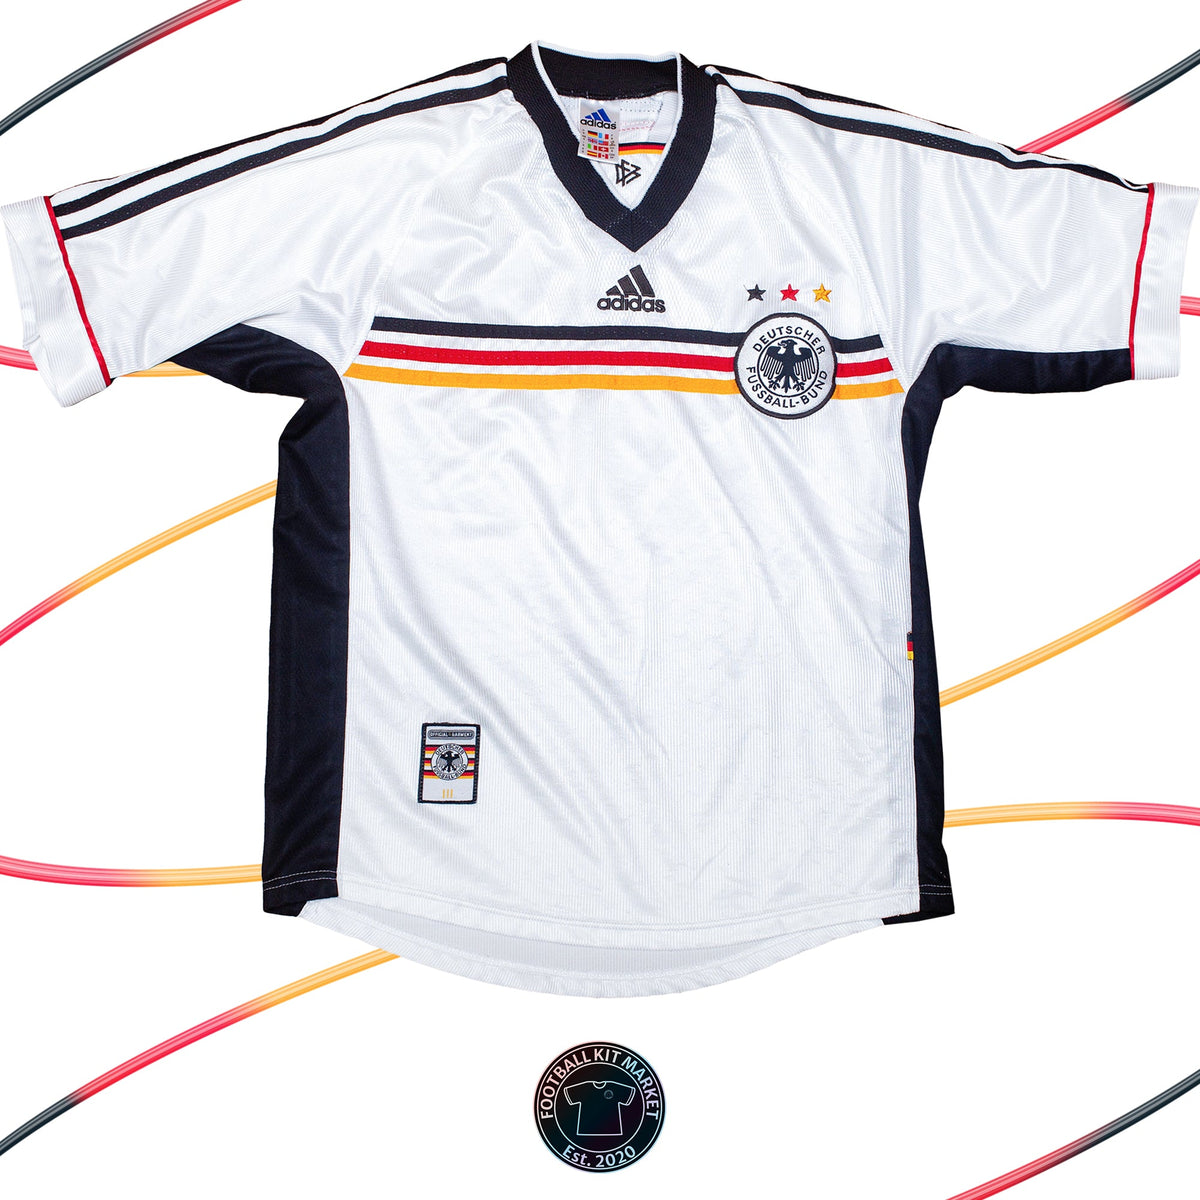 Genuine GERMANY Home (1998-2000) - ADIDAS (S) - Product Image from Football Kit Market